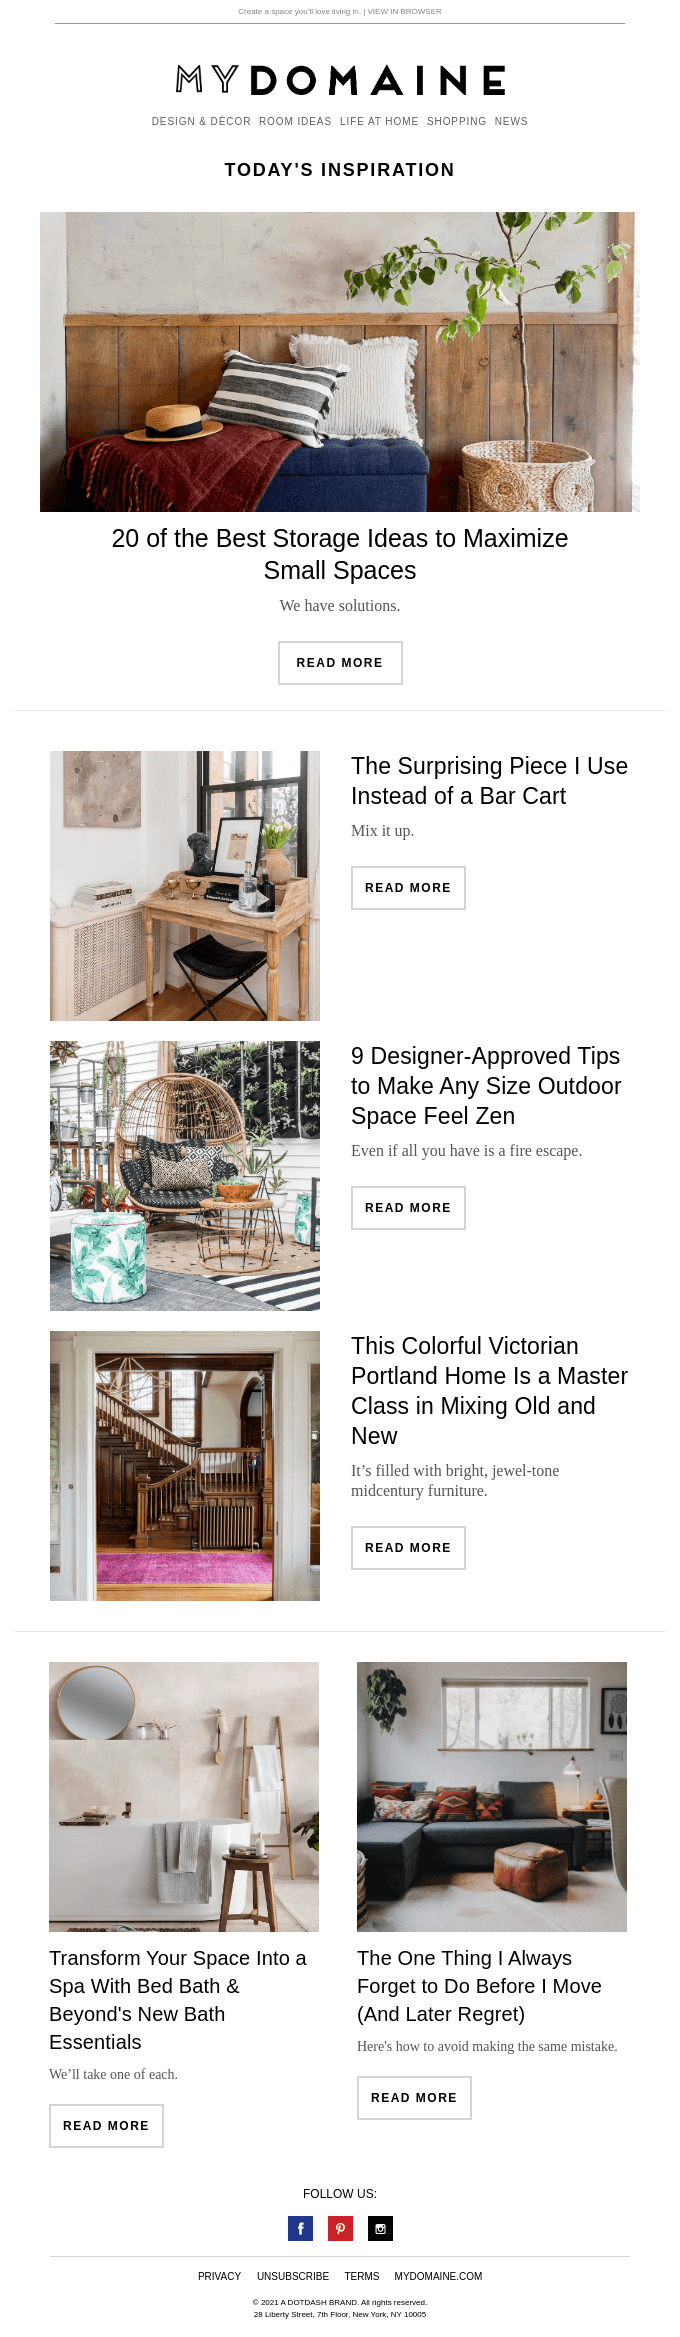 https://files.reallygoodemails.com/emails/20-of-the-best-storage-ideas-to-maximize-small-spaces.png